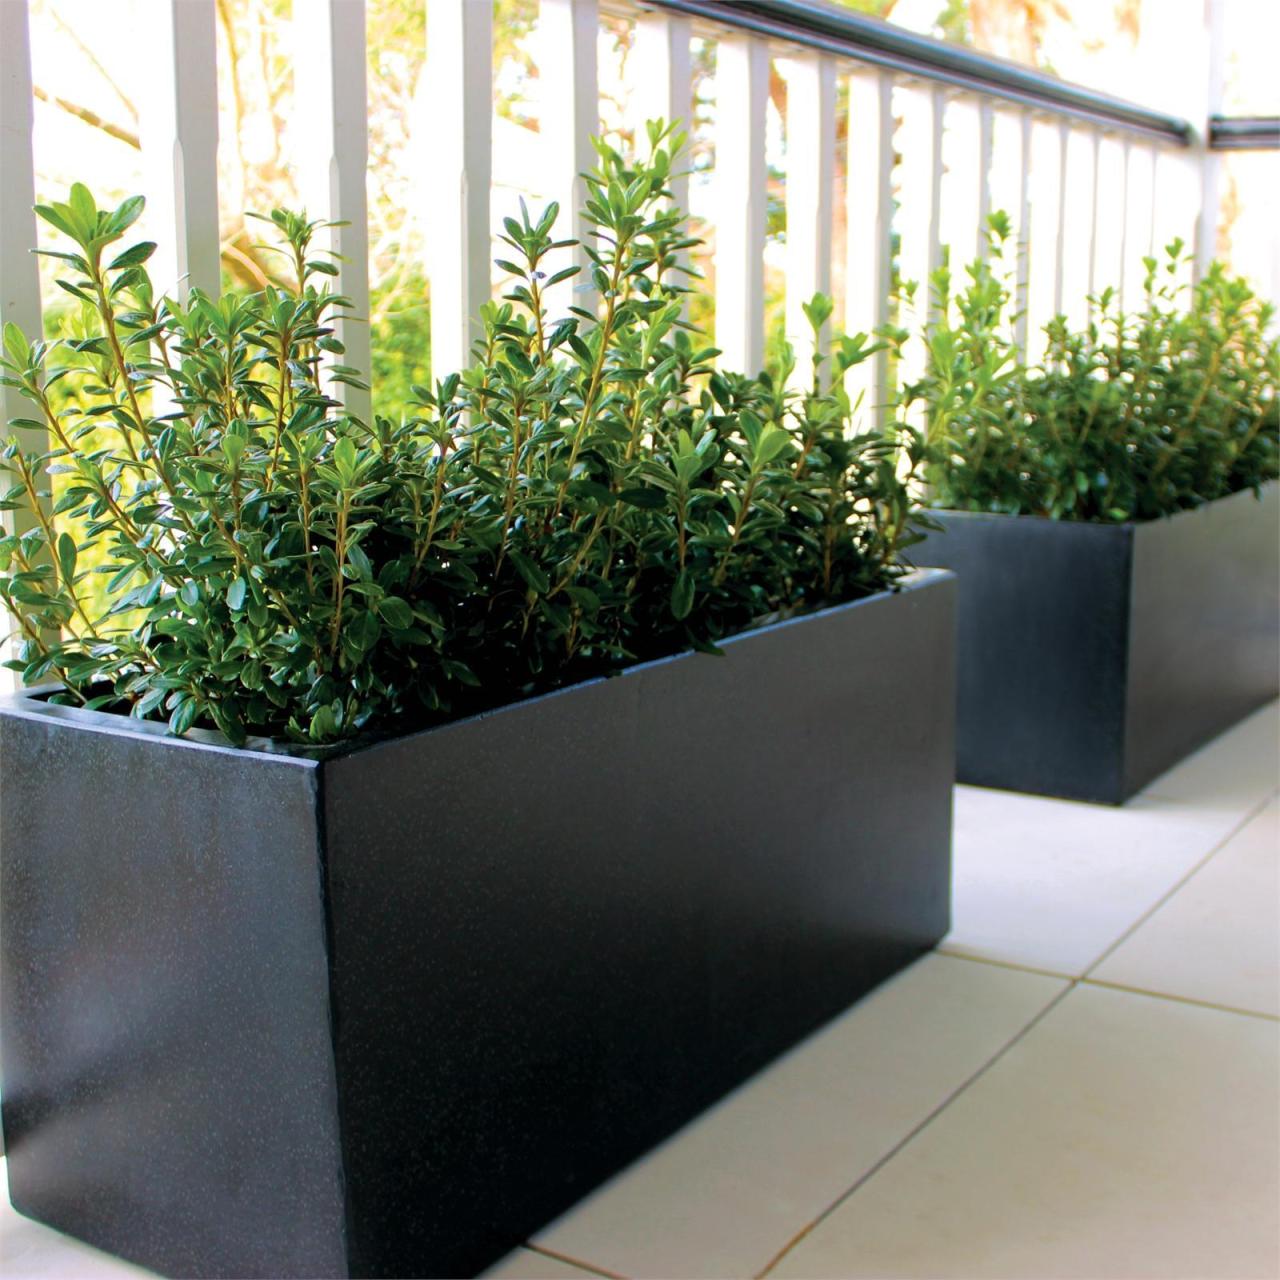 Hanging Plants Indoor | Bunnings Garden Pots Large: A Comprehensive Guide to Enhance Your Outdoor Space